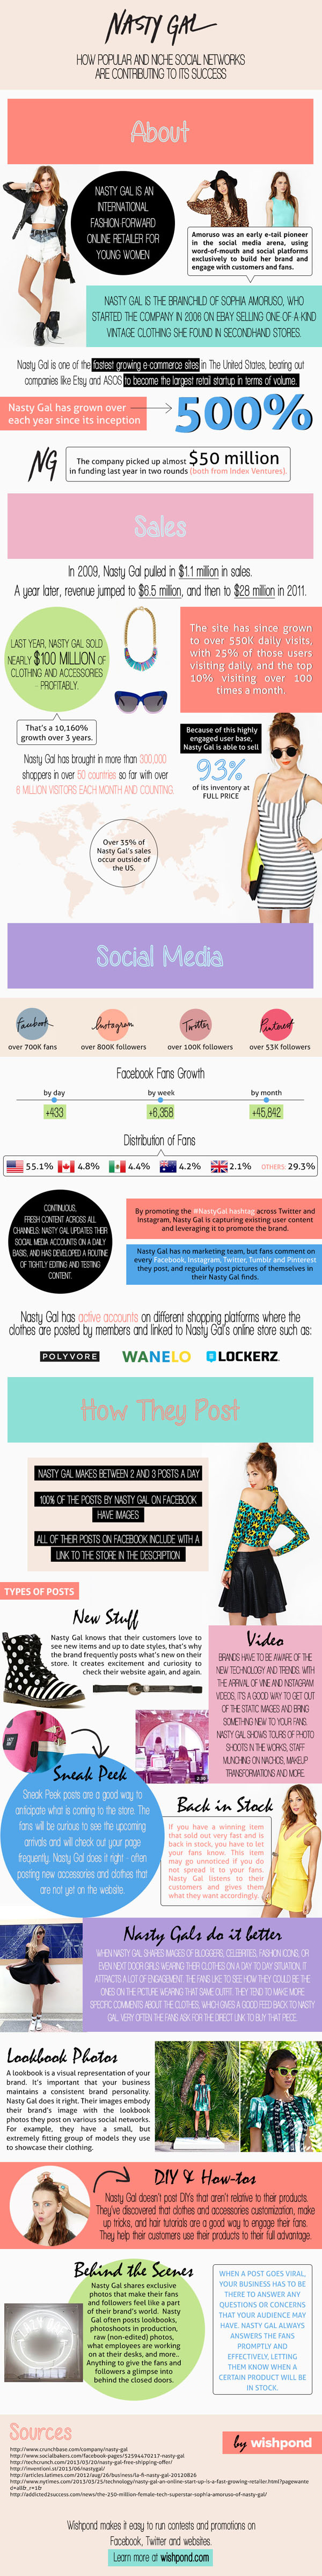 Nasty Gal: How Popular and Niche Social Networks Are Contributing To Its Success Infographic